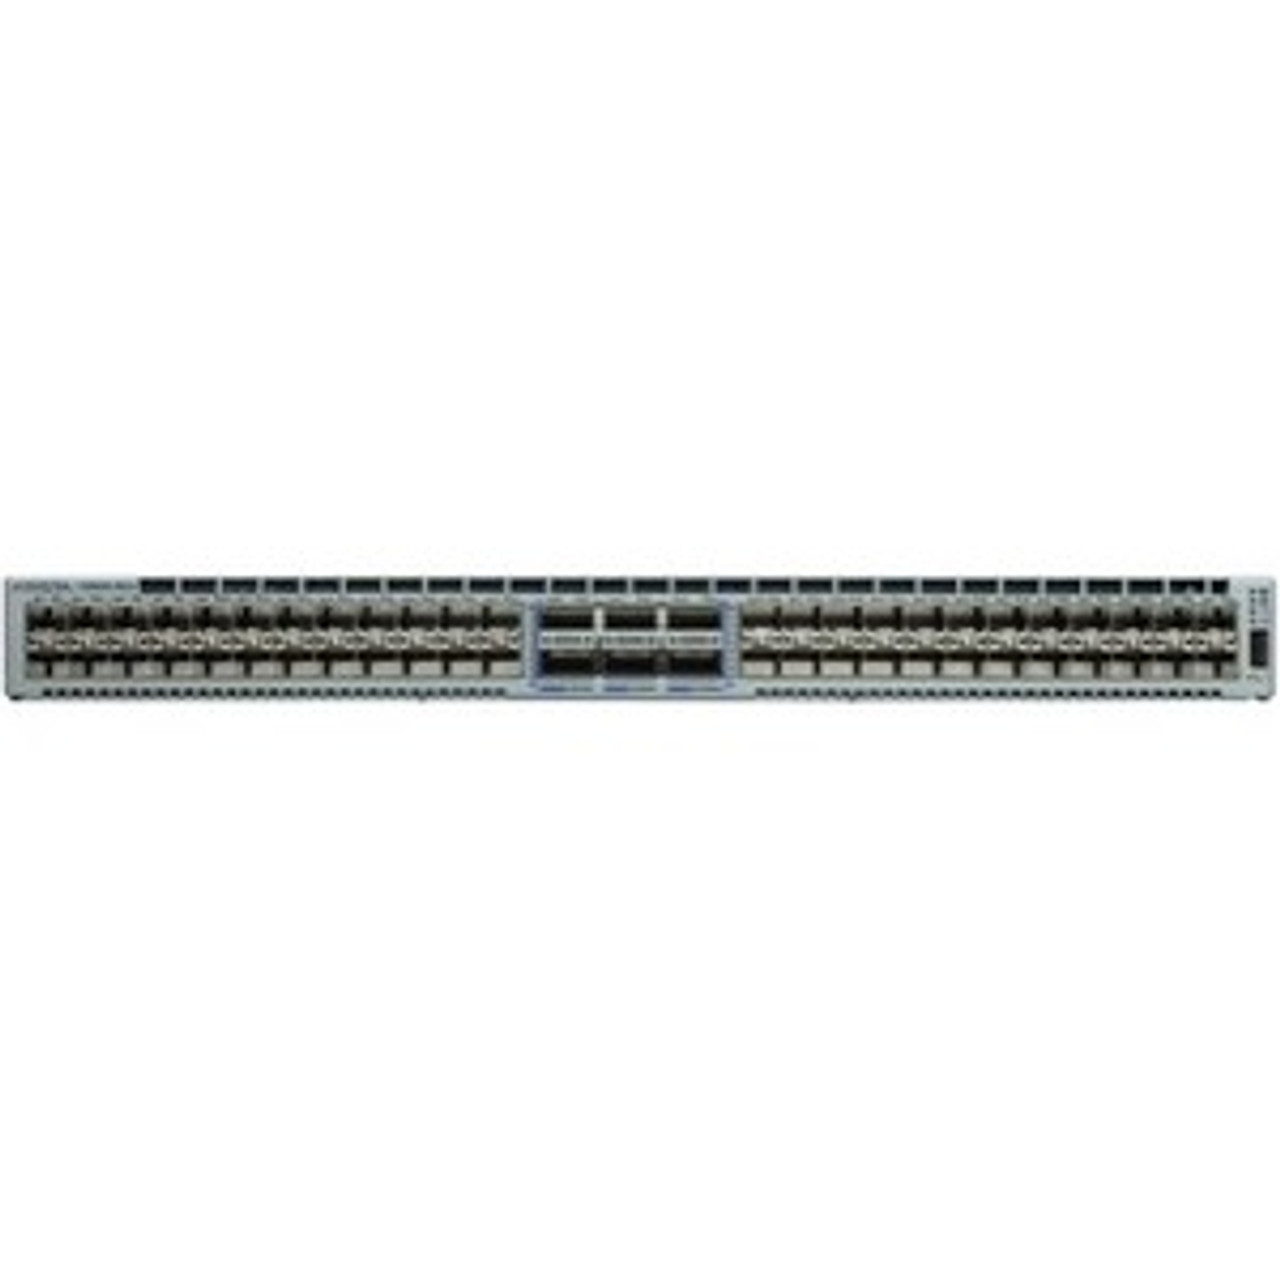 DCS-7280SRA-48C6-R Arista Networks 7280SRA-48C6 Ethernet Switch - Manageable - 3 Layer Supported - Modular - 581 W Power Consumption - Optical Fiber - 1U High -